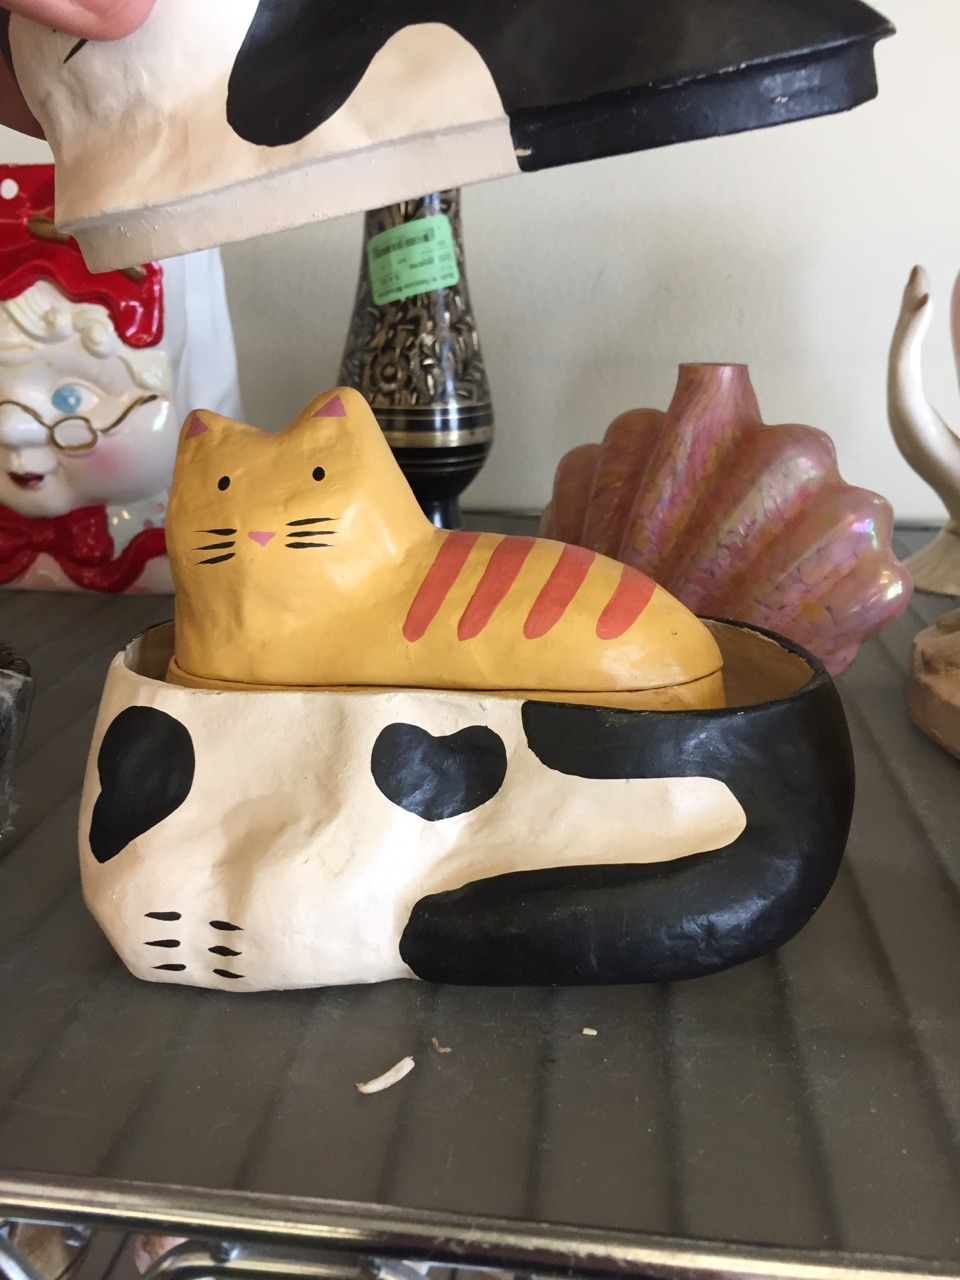 shiftythrifting:  A cat box with a smaller cat inside it. I expected nesting cats